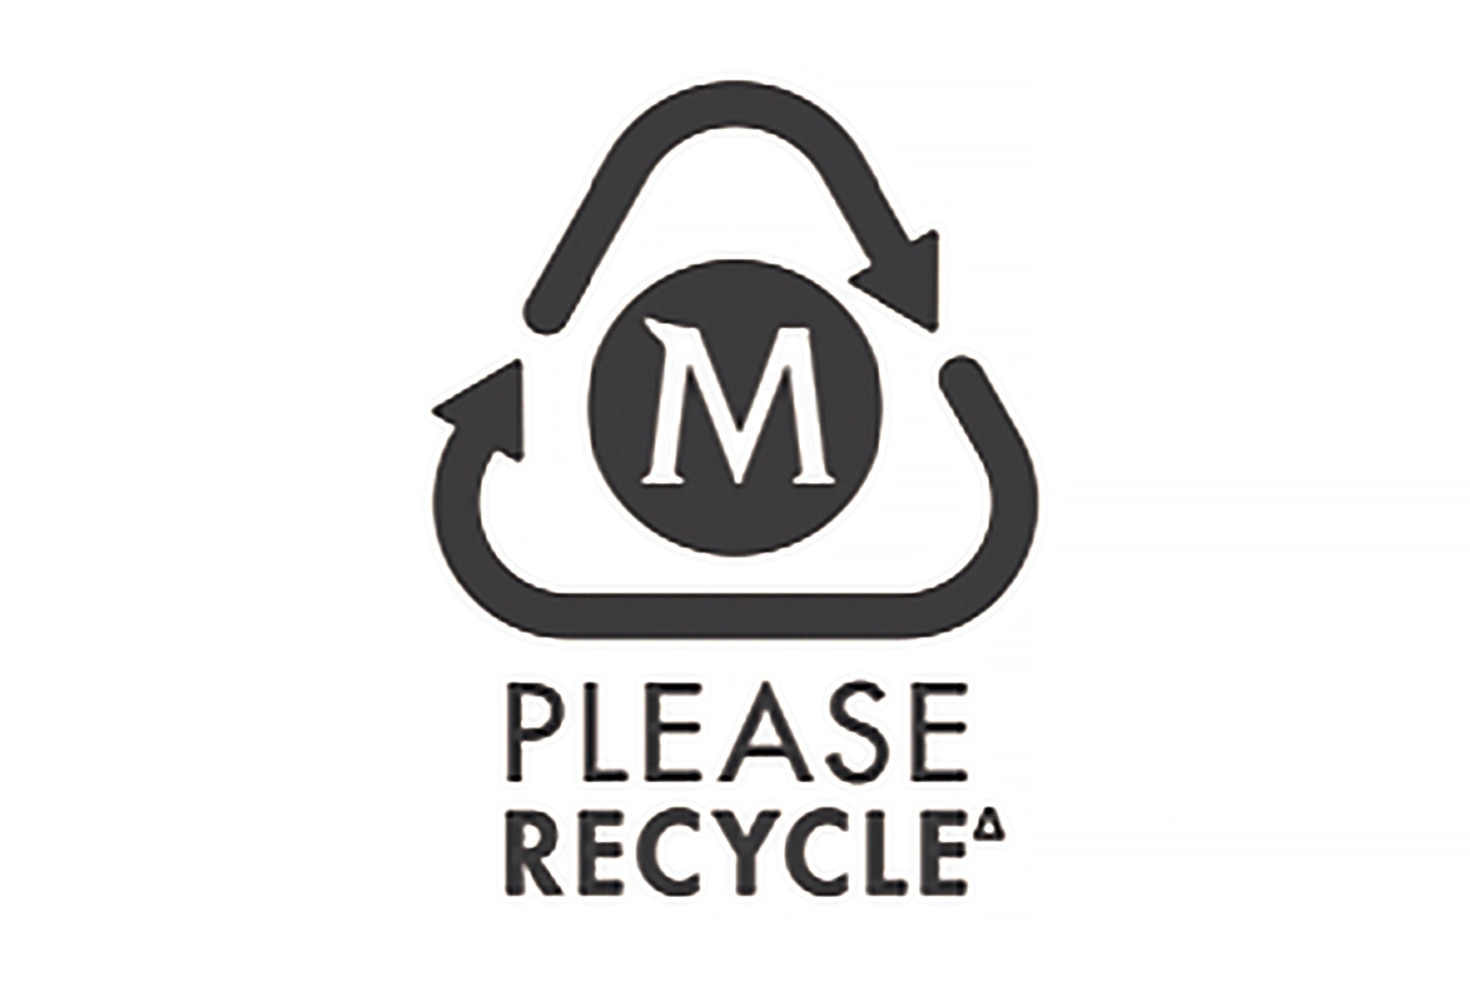 Magnum please recycle logo Text